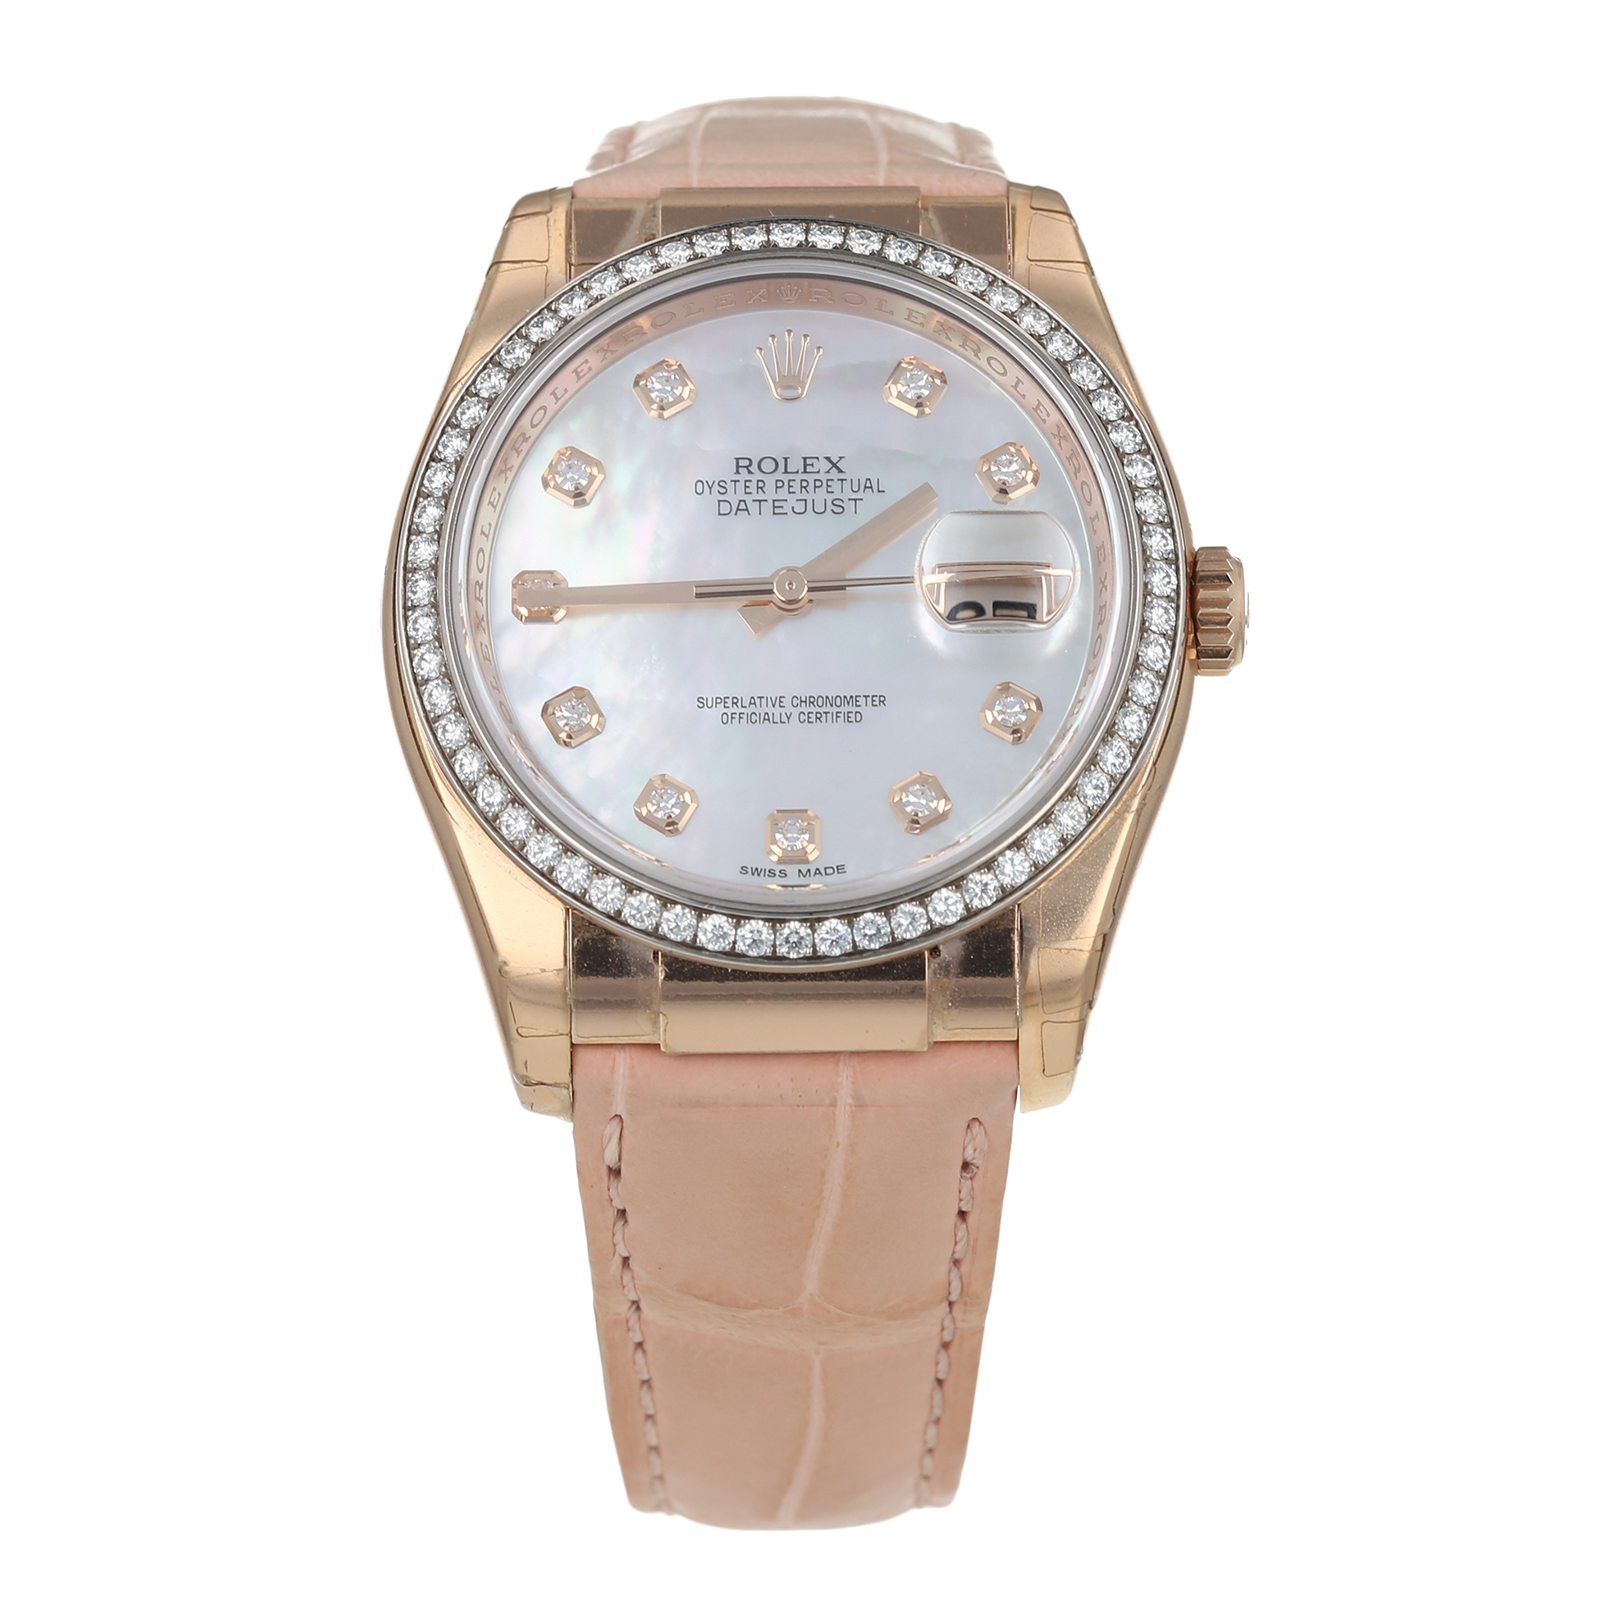 Pre-Owned Rolex Datejust Ladies Watch 116185 Review